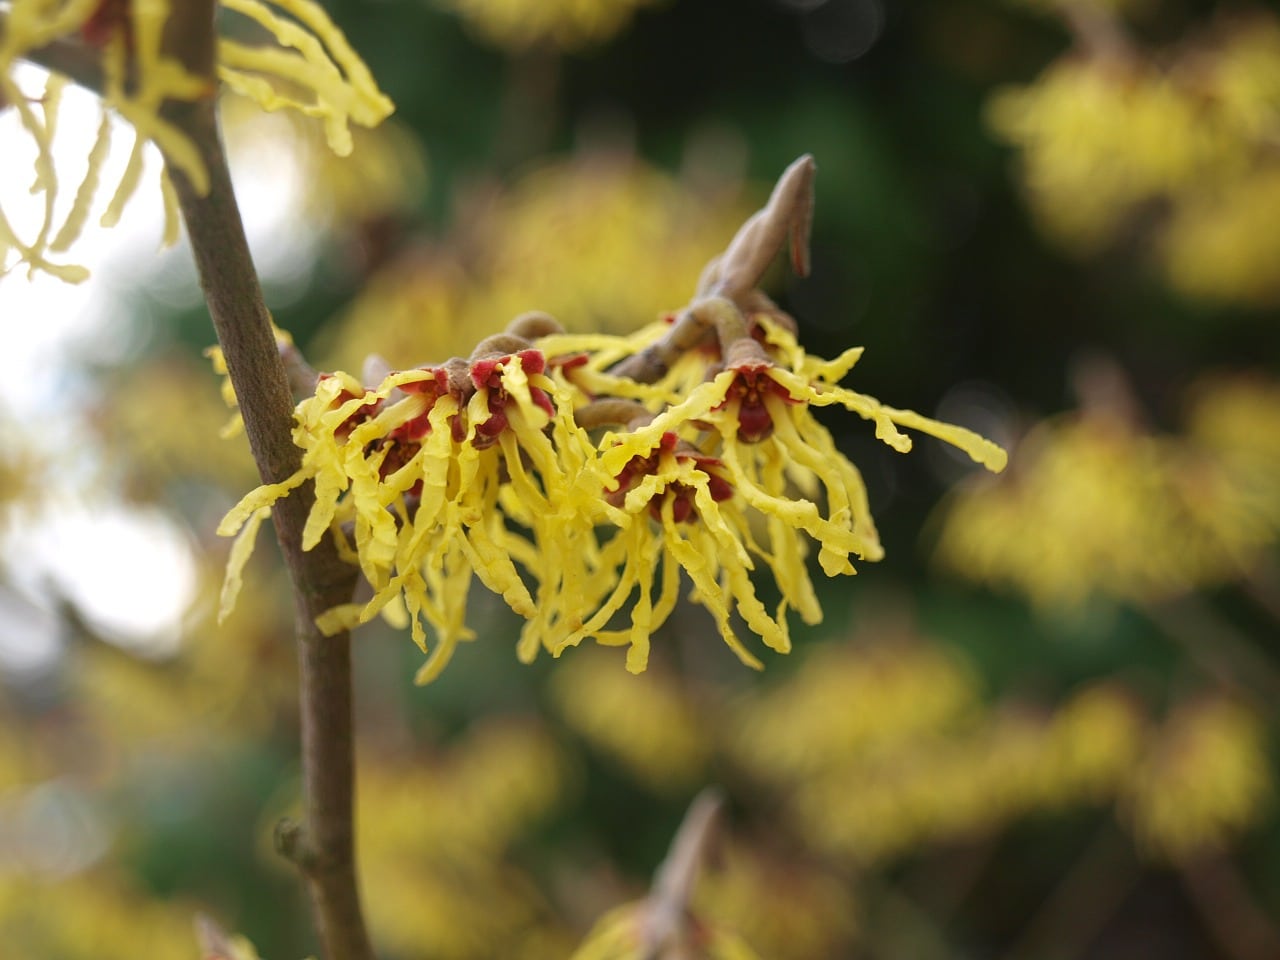 3 Gallon a vase Shaped Flowering Shrub prized for Yellow Flowers That Have a Warm Spicy Fragrance That Arrive in Early March. Witch Hazel 